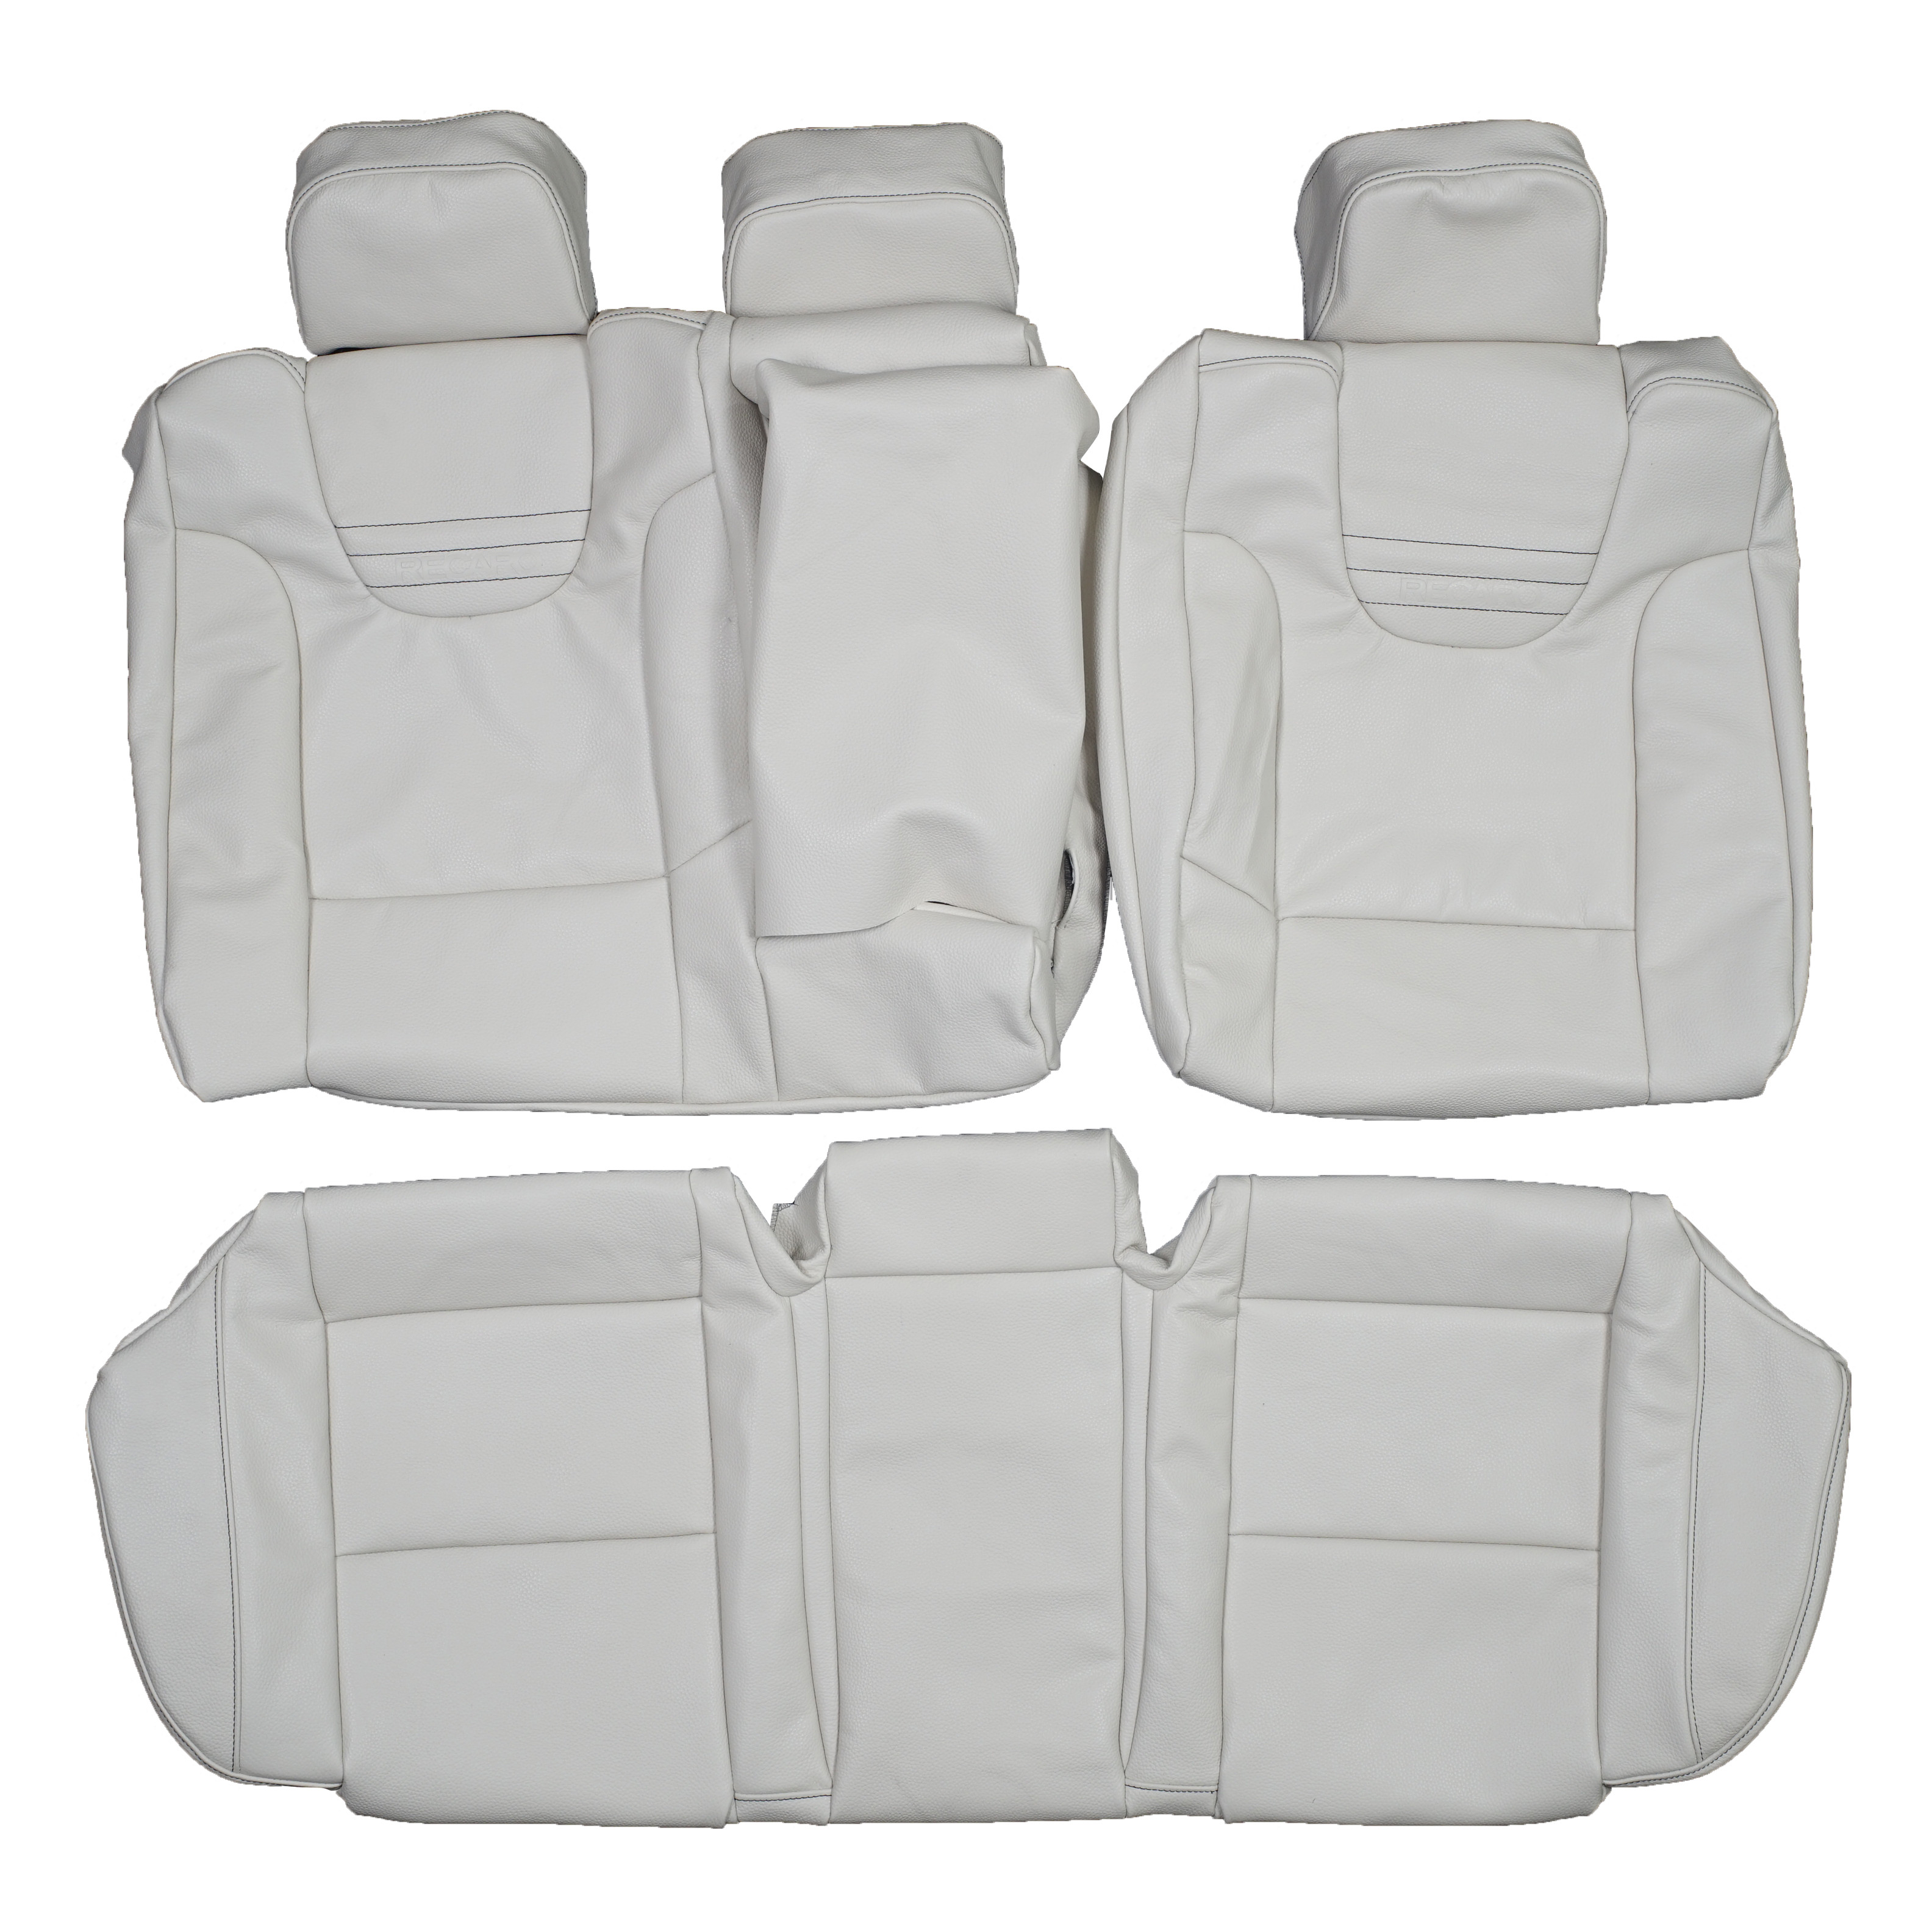 2003-2005 Audi S4 B6 Custom Real Leather Seat Covers (Rear) - Lseat.com